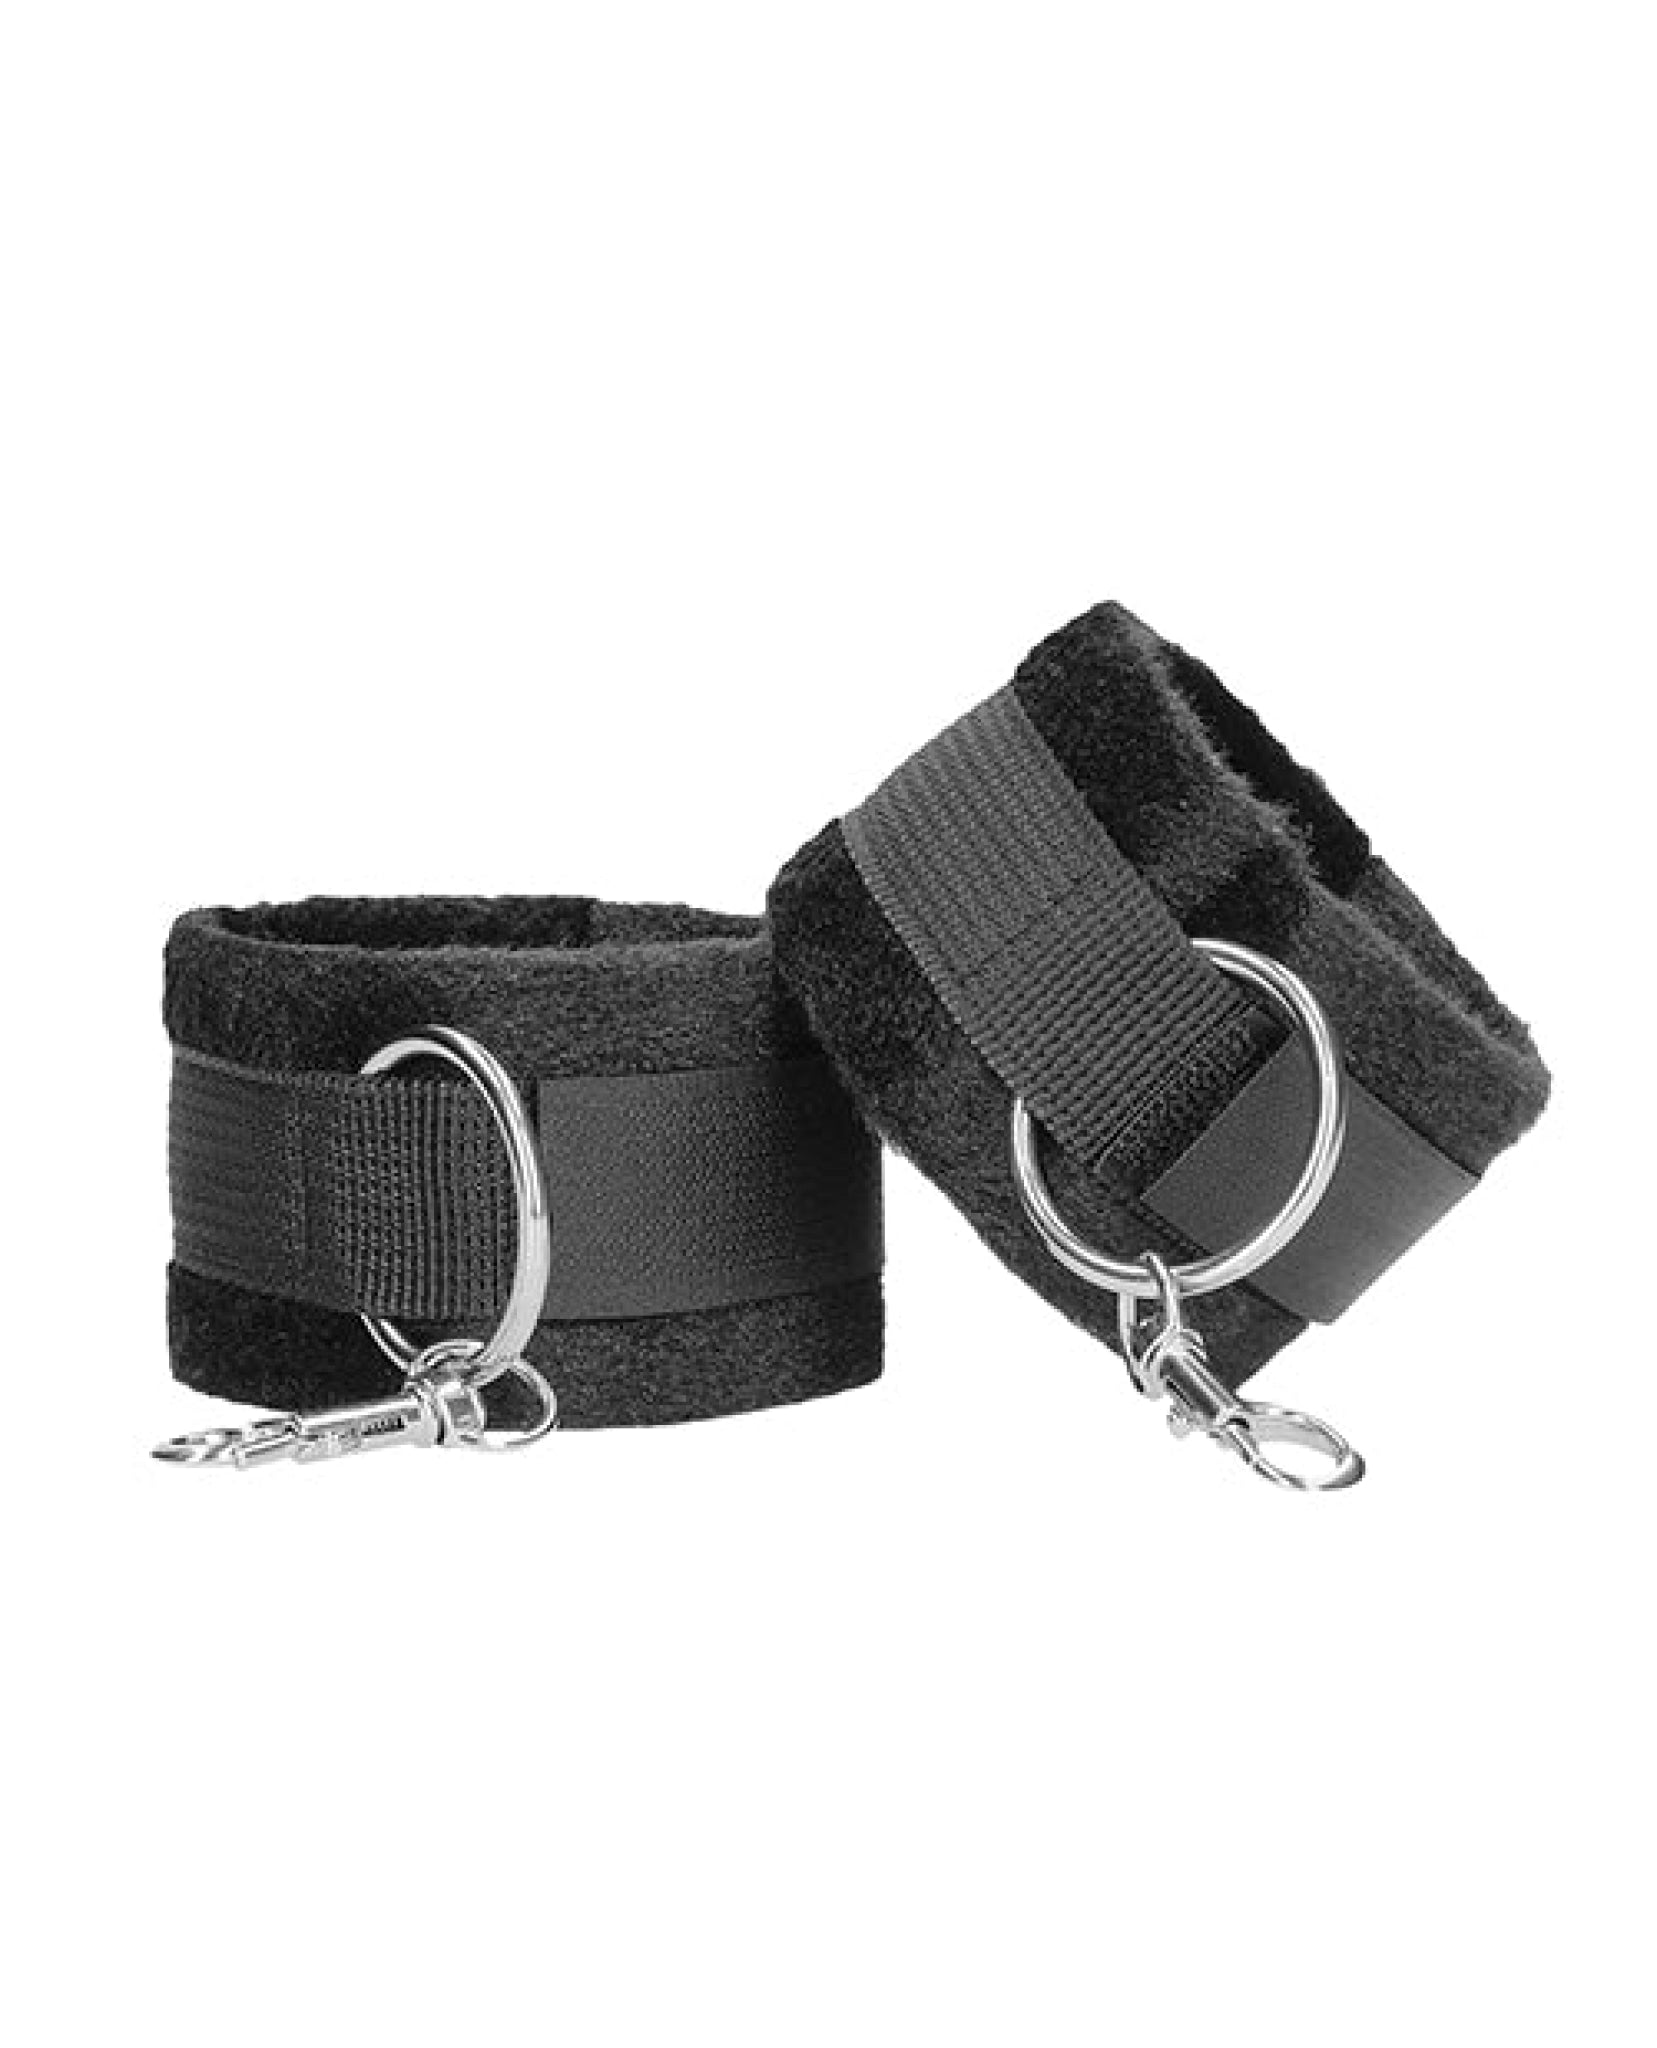 Shots Ouch Black & White Velcro Hand-ankle Cuffs - Black Shots